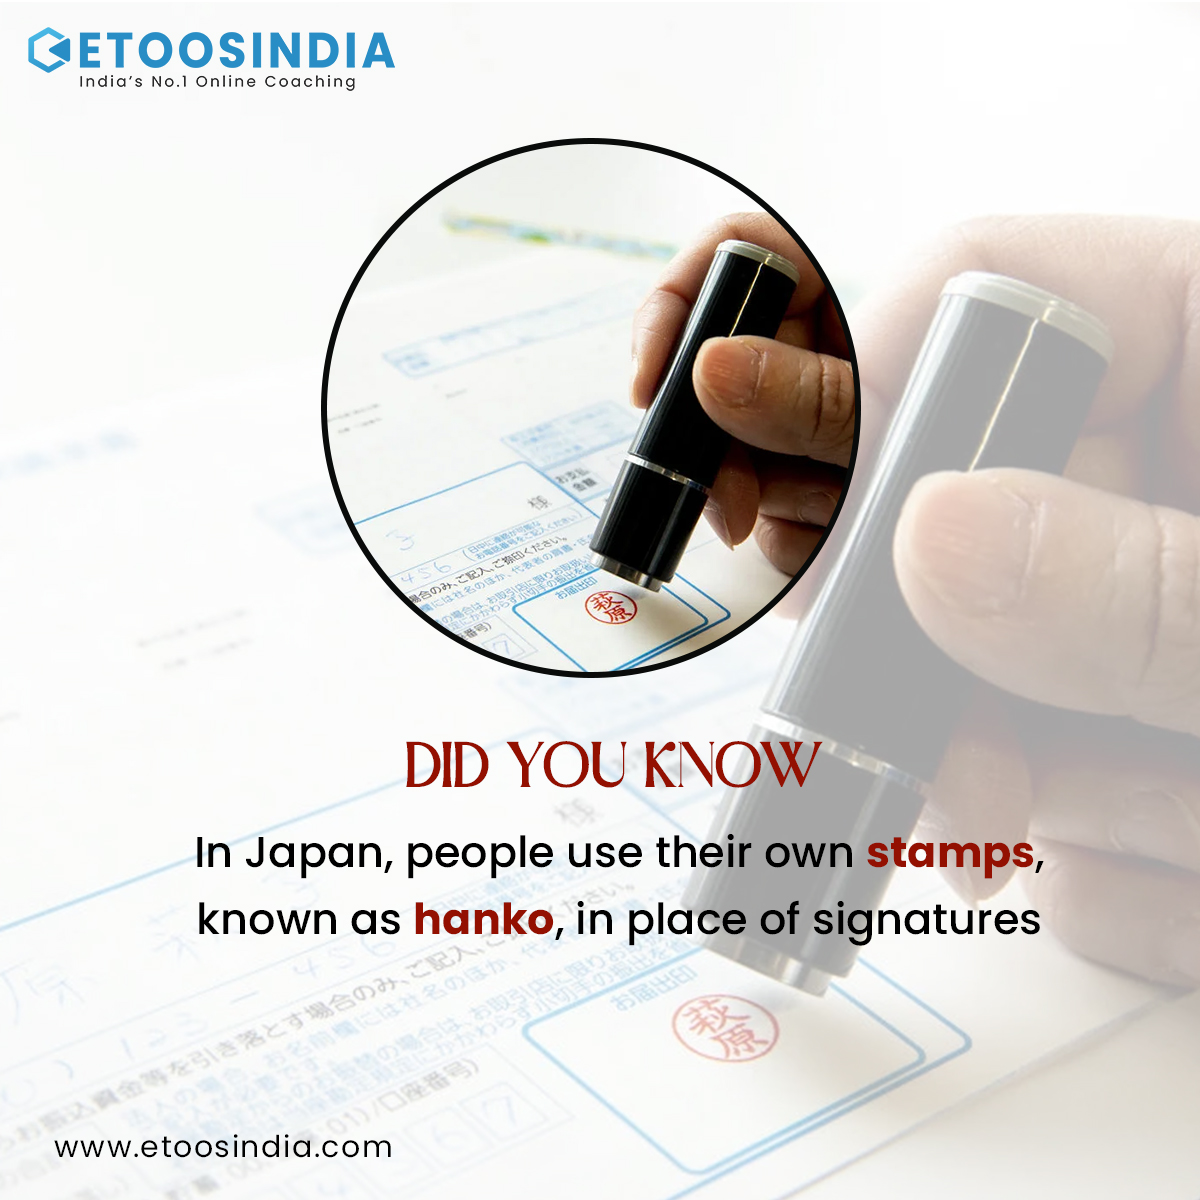 'Did You Know' Facts are everywhere, We just need the correct vision to find one

#etoosindia #facts #didyouknow #hanko #japanesesignature #knowledge #dailyfacts #amazingfacts #instafacts